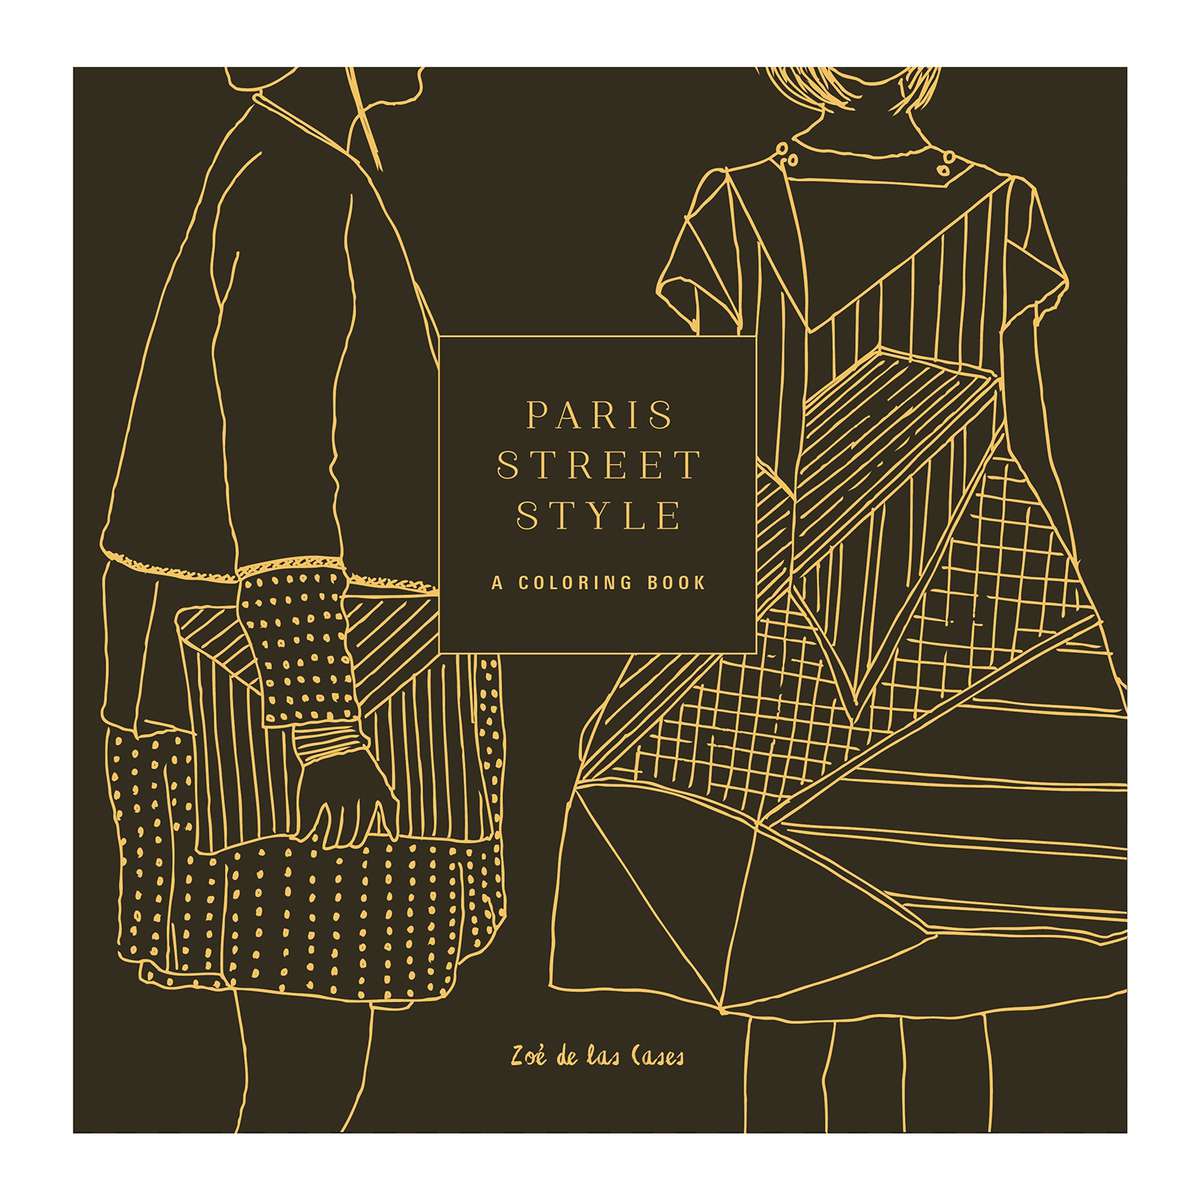 Paris Street Style: A Coloring Book